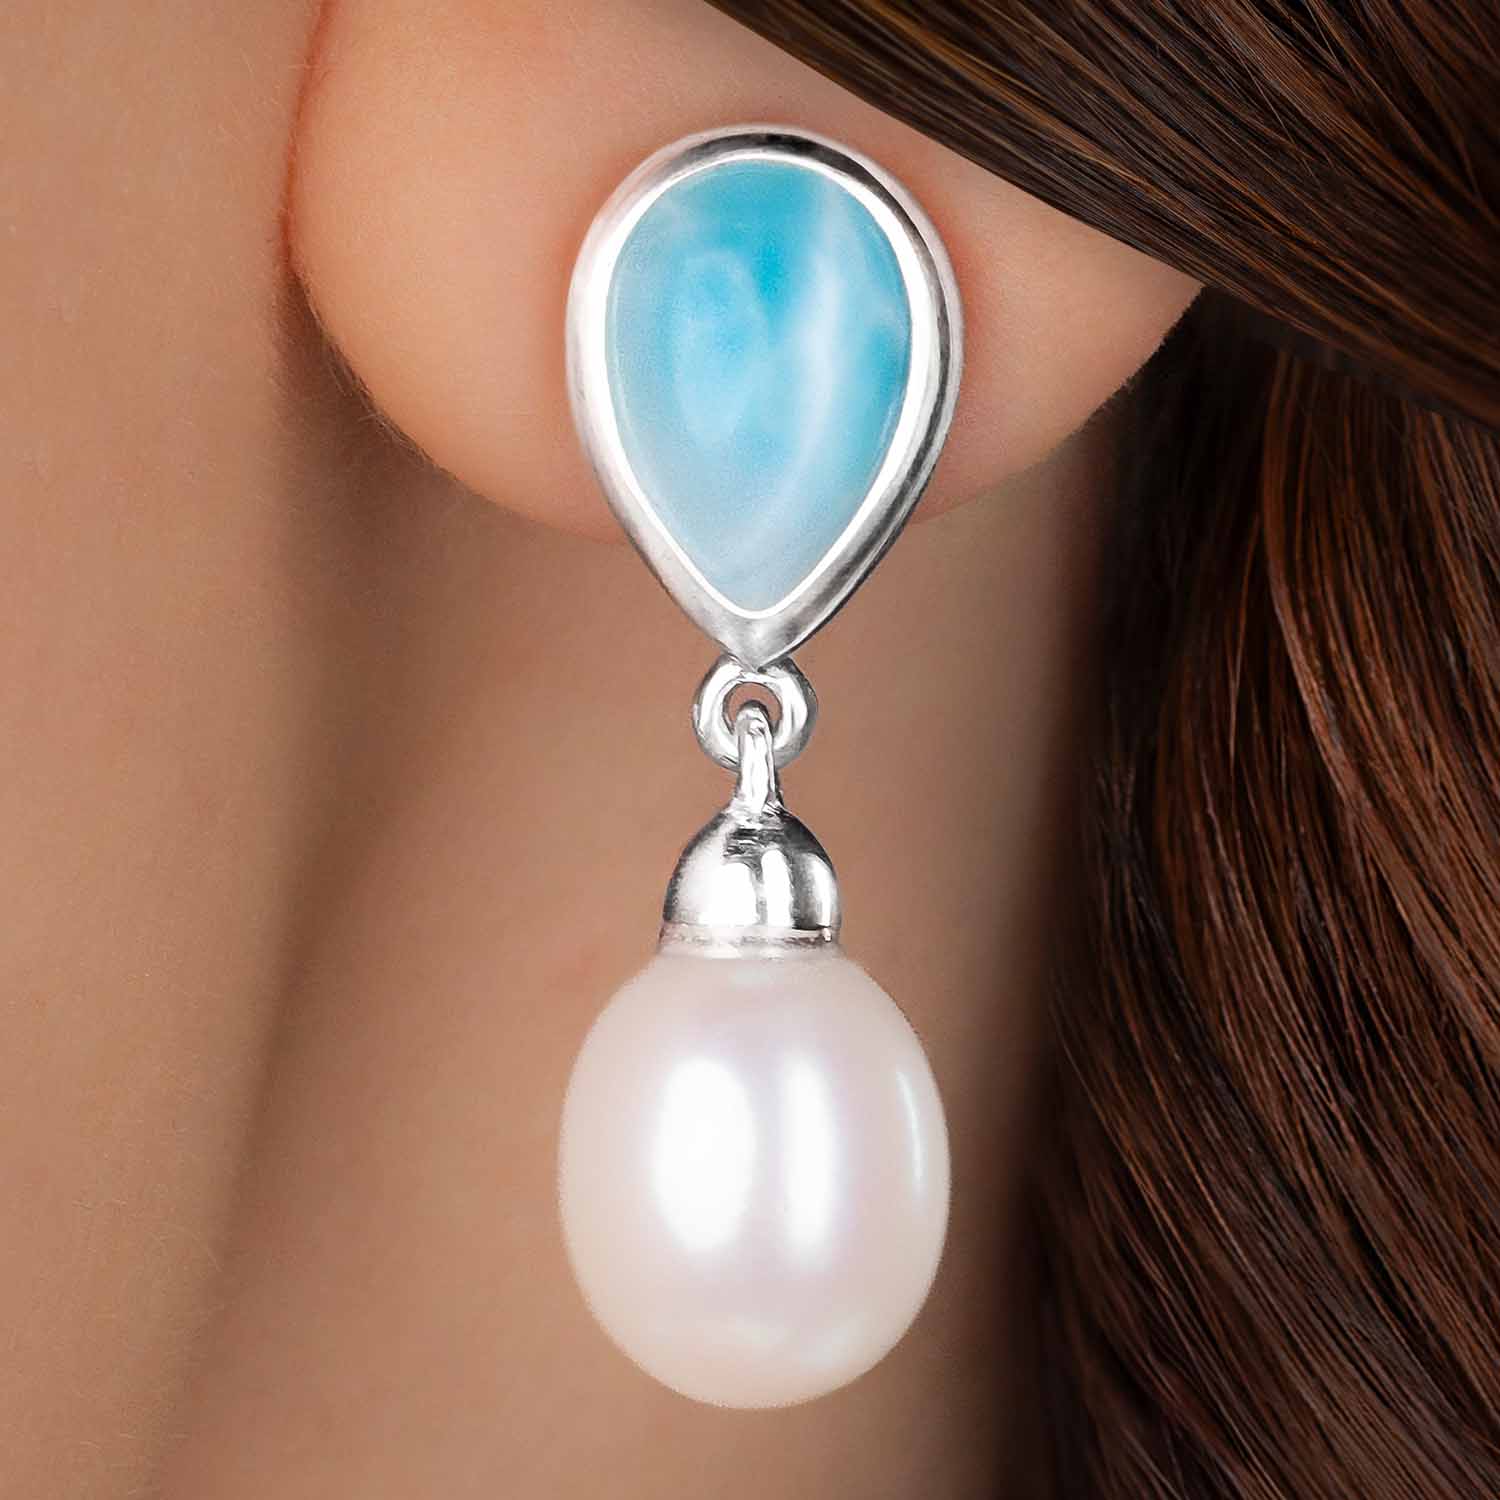 Pearl Earrings With Larimar by marahlago